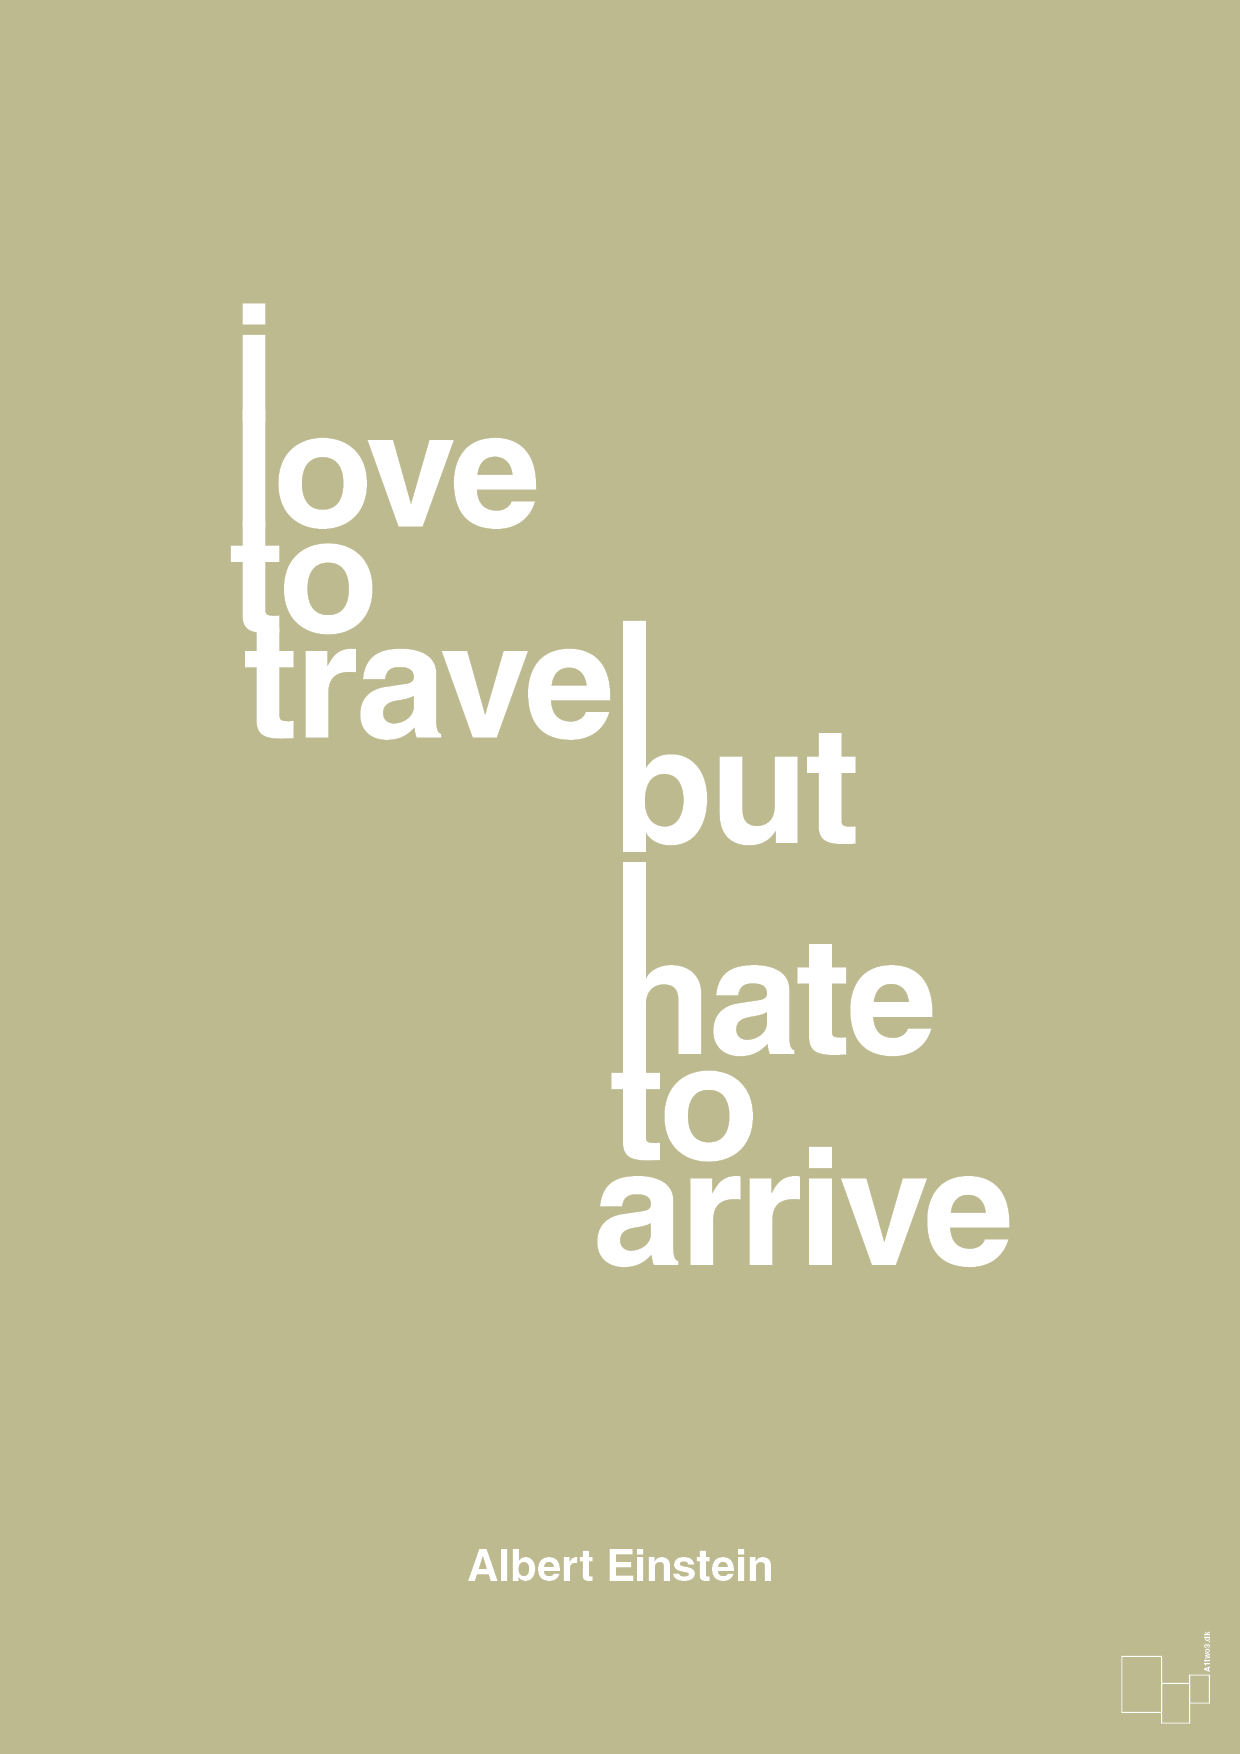 i love to travel but hate to arrive - Plakat med Citater i Back to Nature